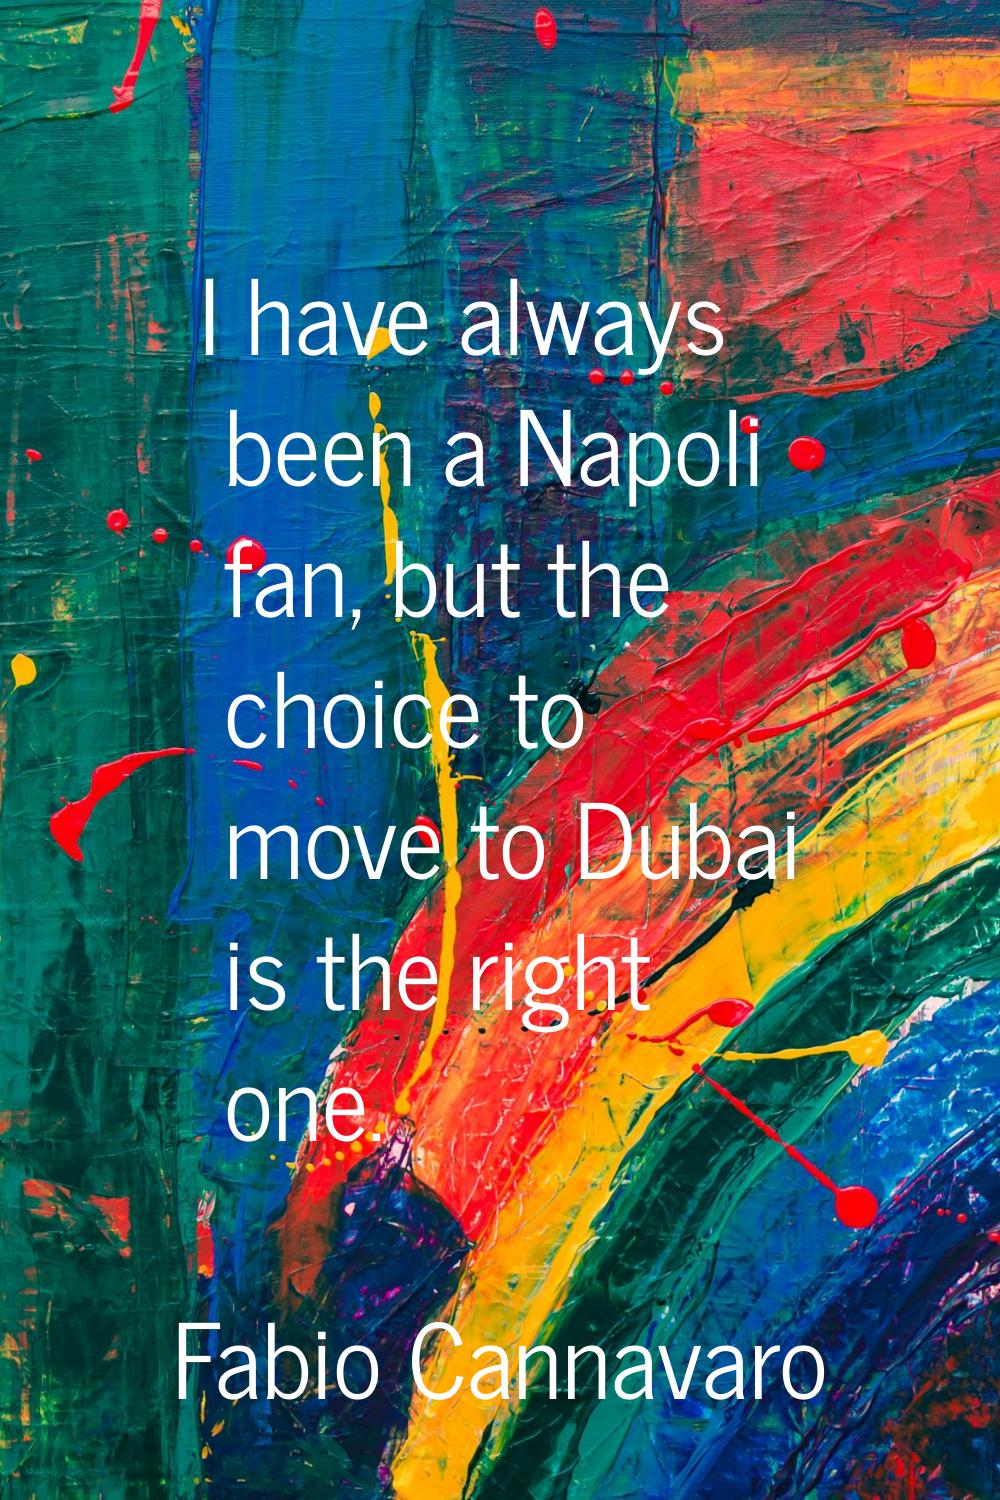 I have always been a Napoli fan, but the choice to move to Dubai is the right one.